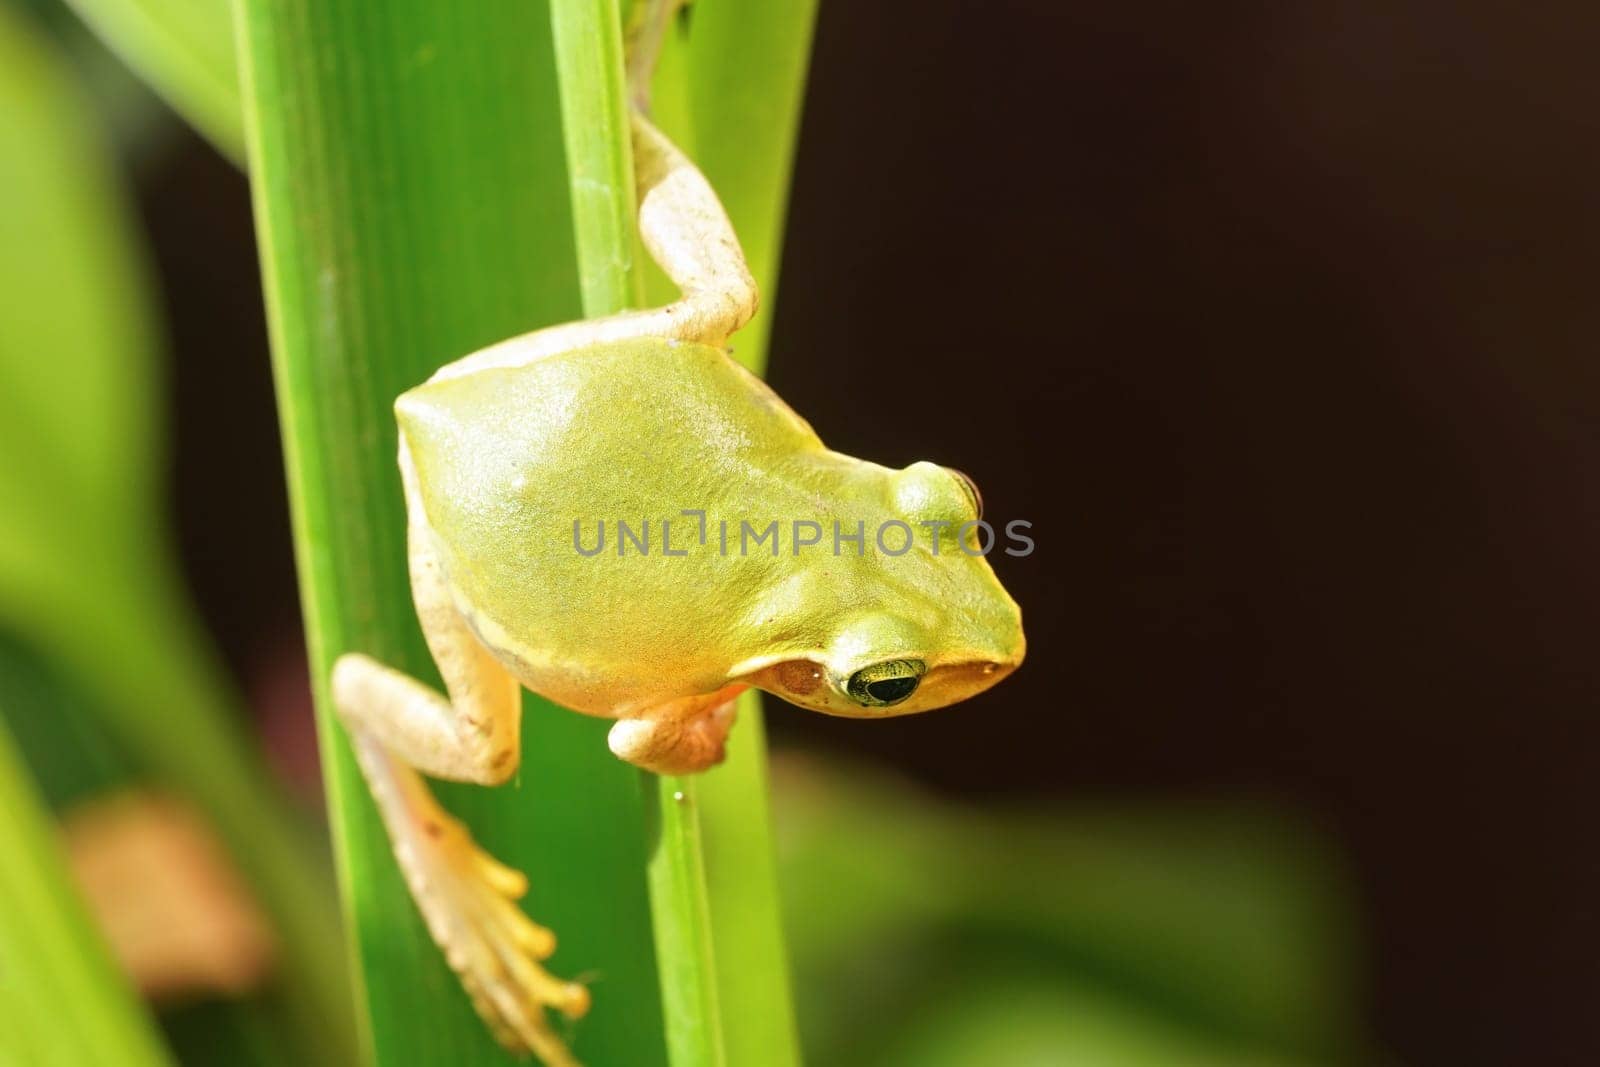 Small Madagascar green tree frog resting on green leaf, closeup detail by Ivanko